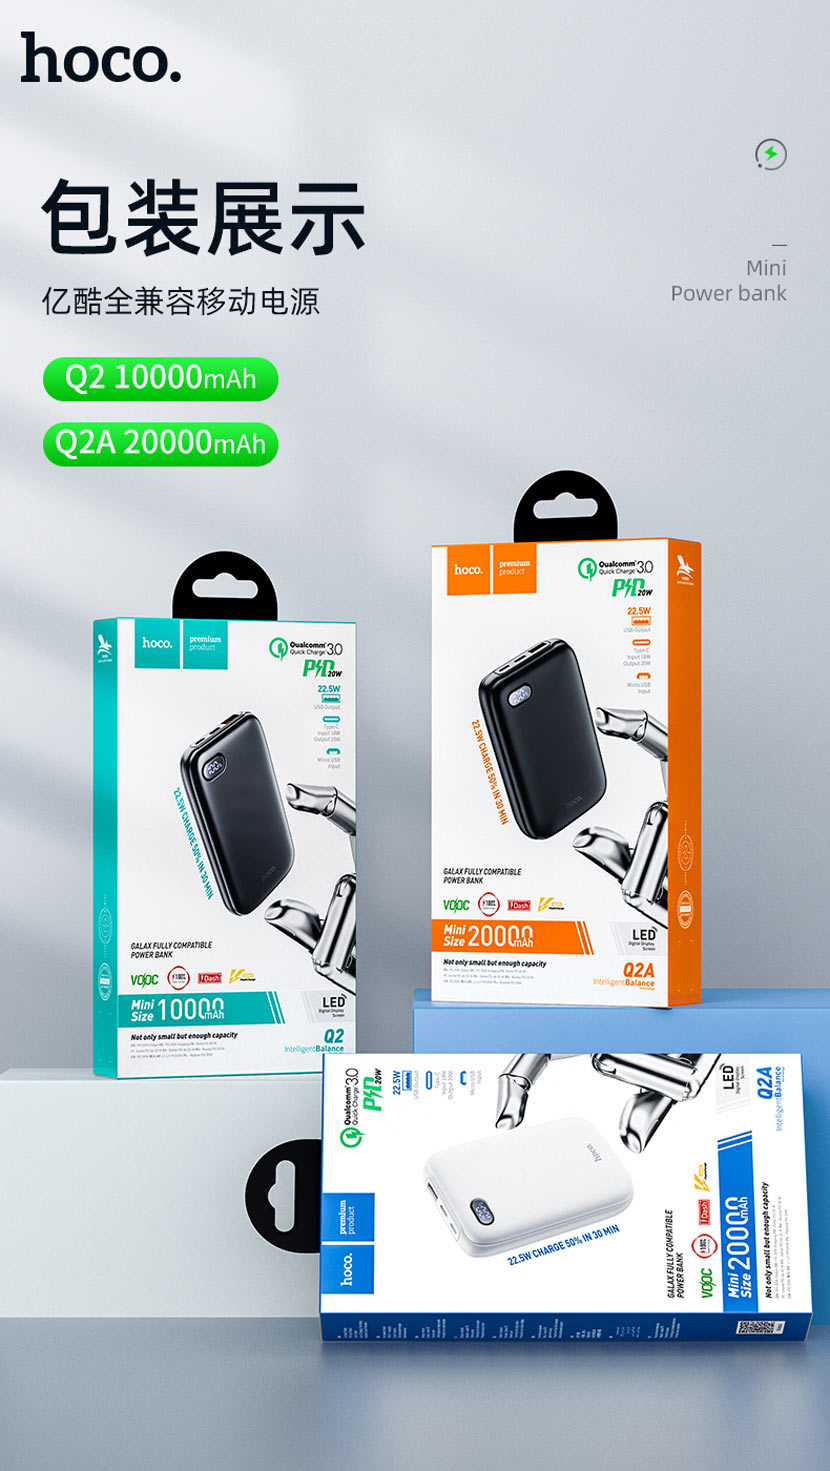 hoco news q2 q2a galax fully compatible power bank package cn